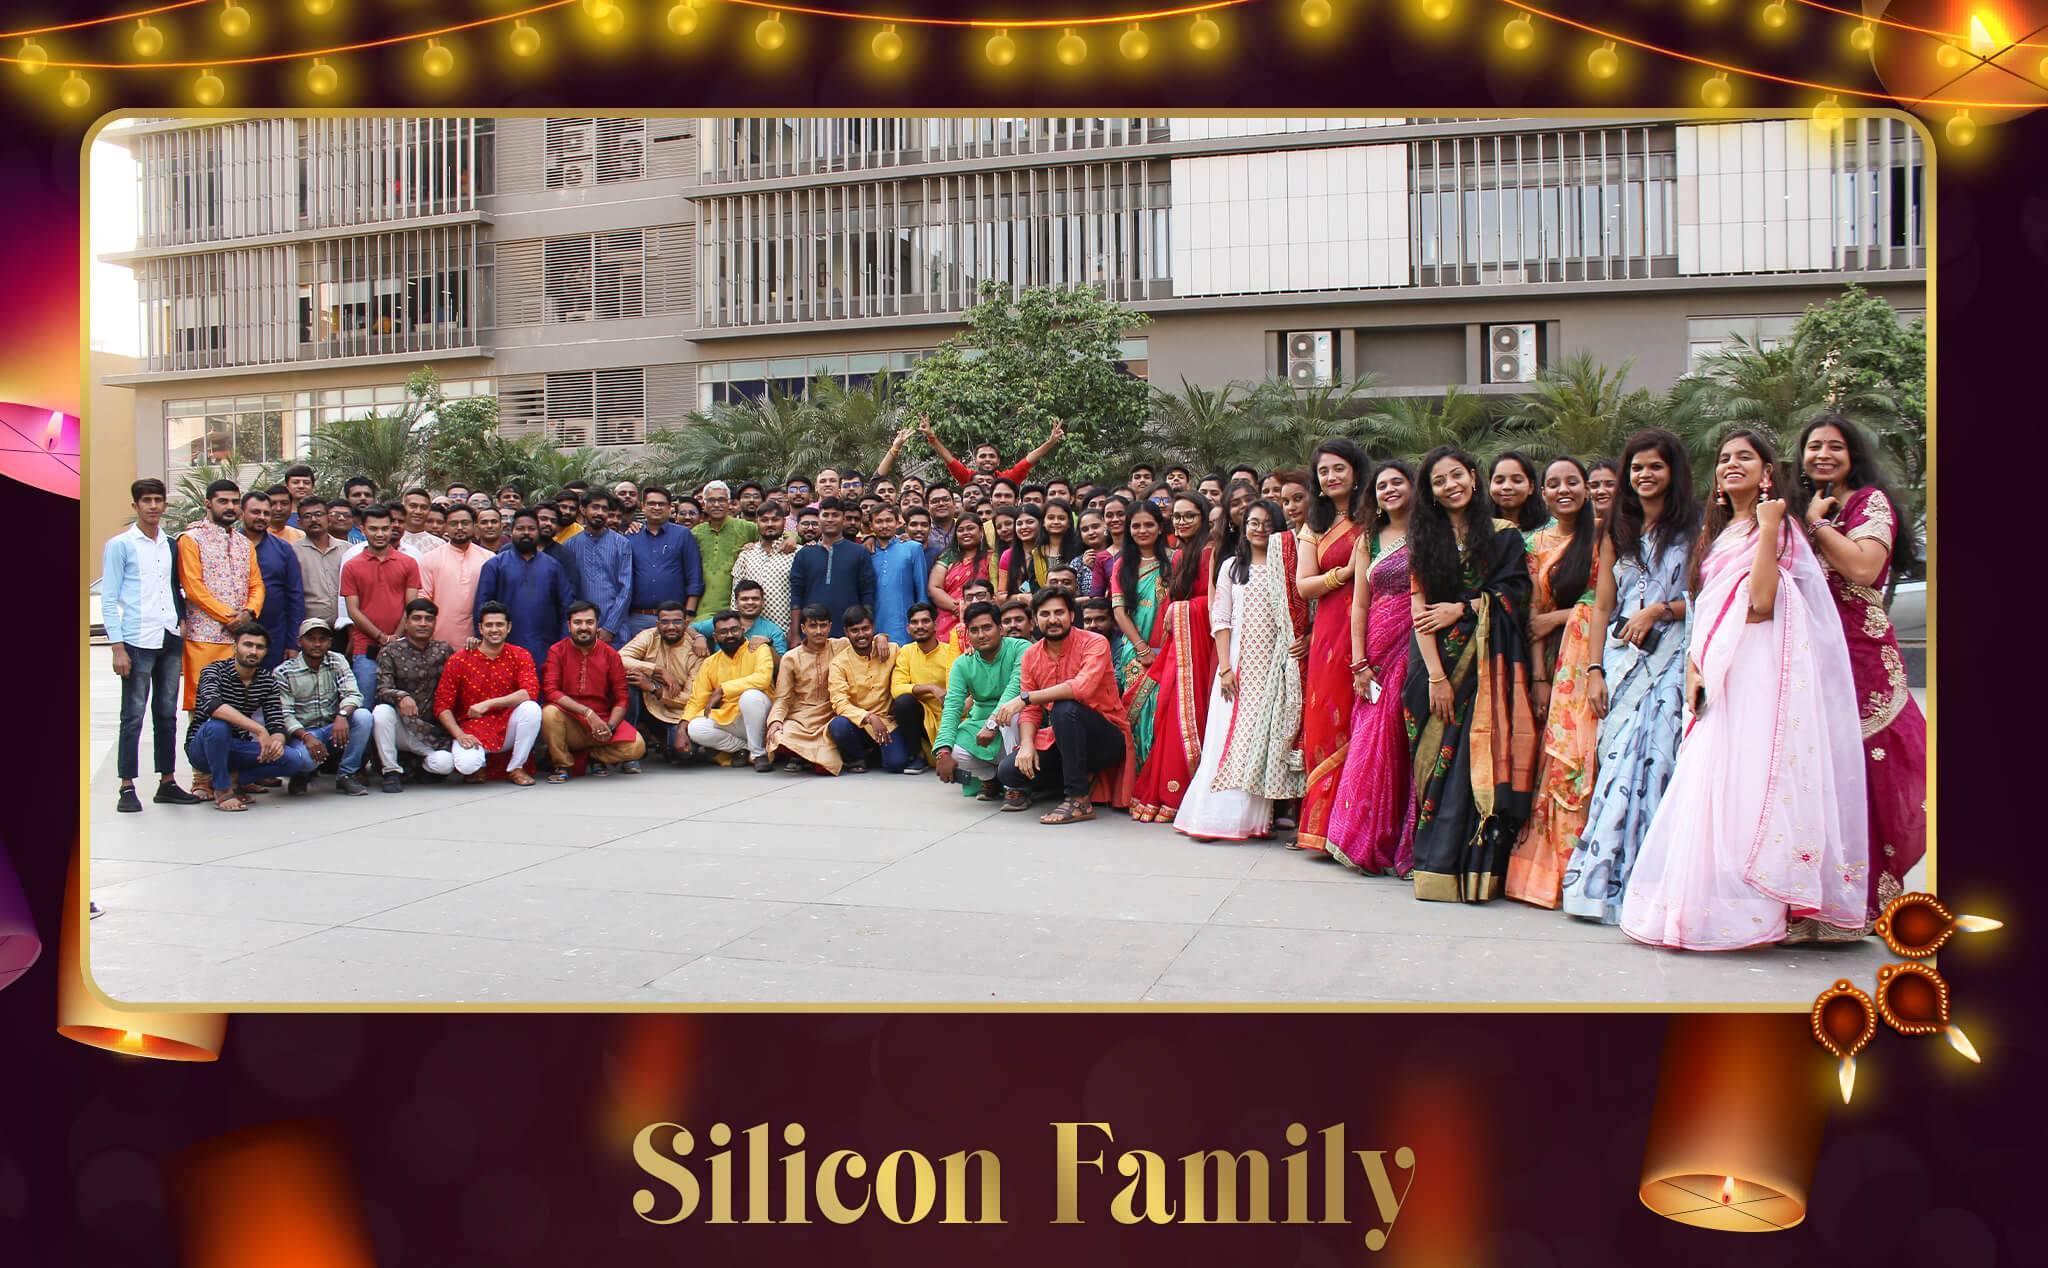 with a lot of enjoyment! Yes, at Silicon, we know to maintain a work-life balance.